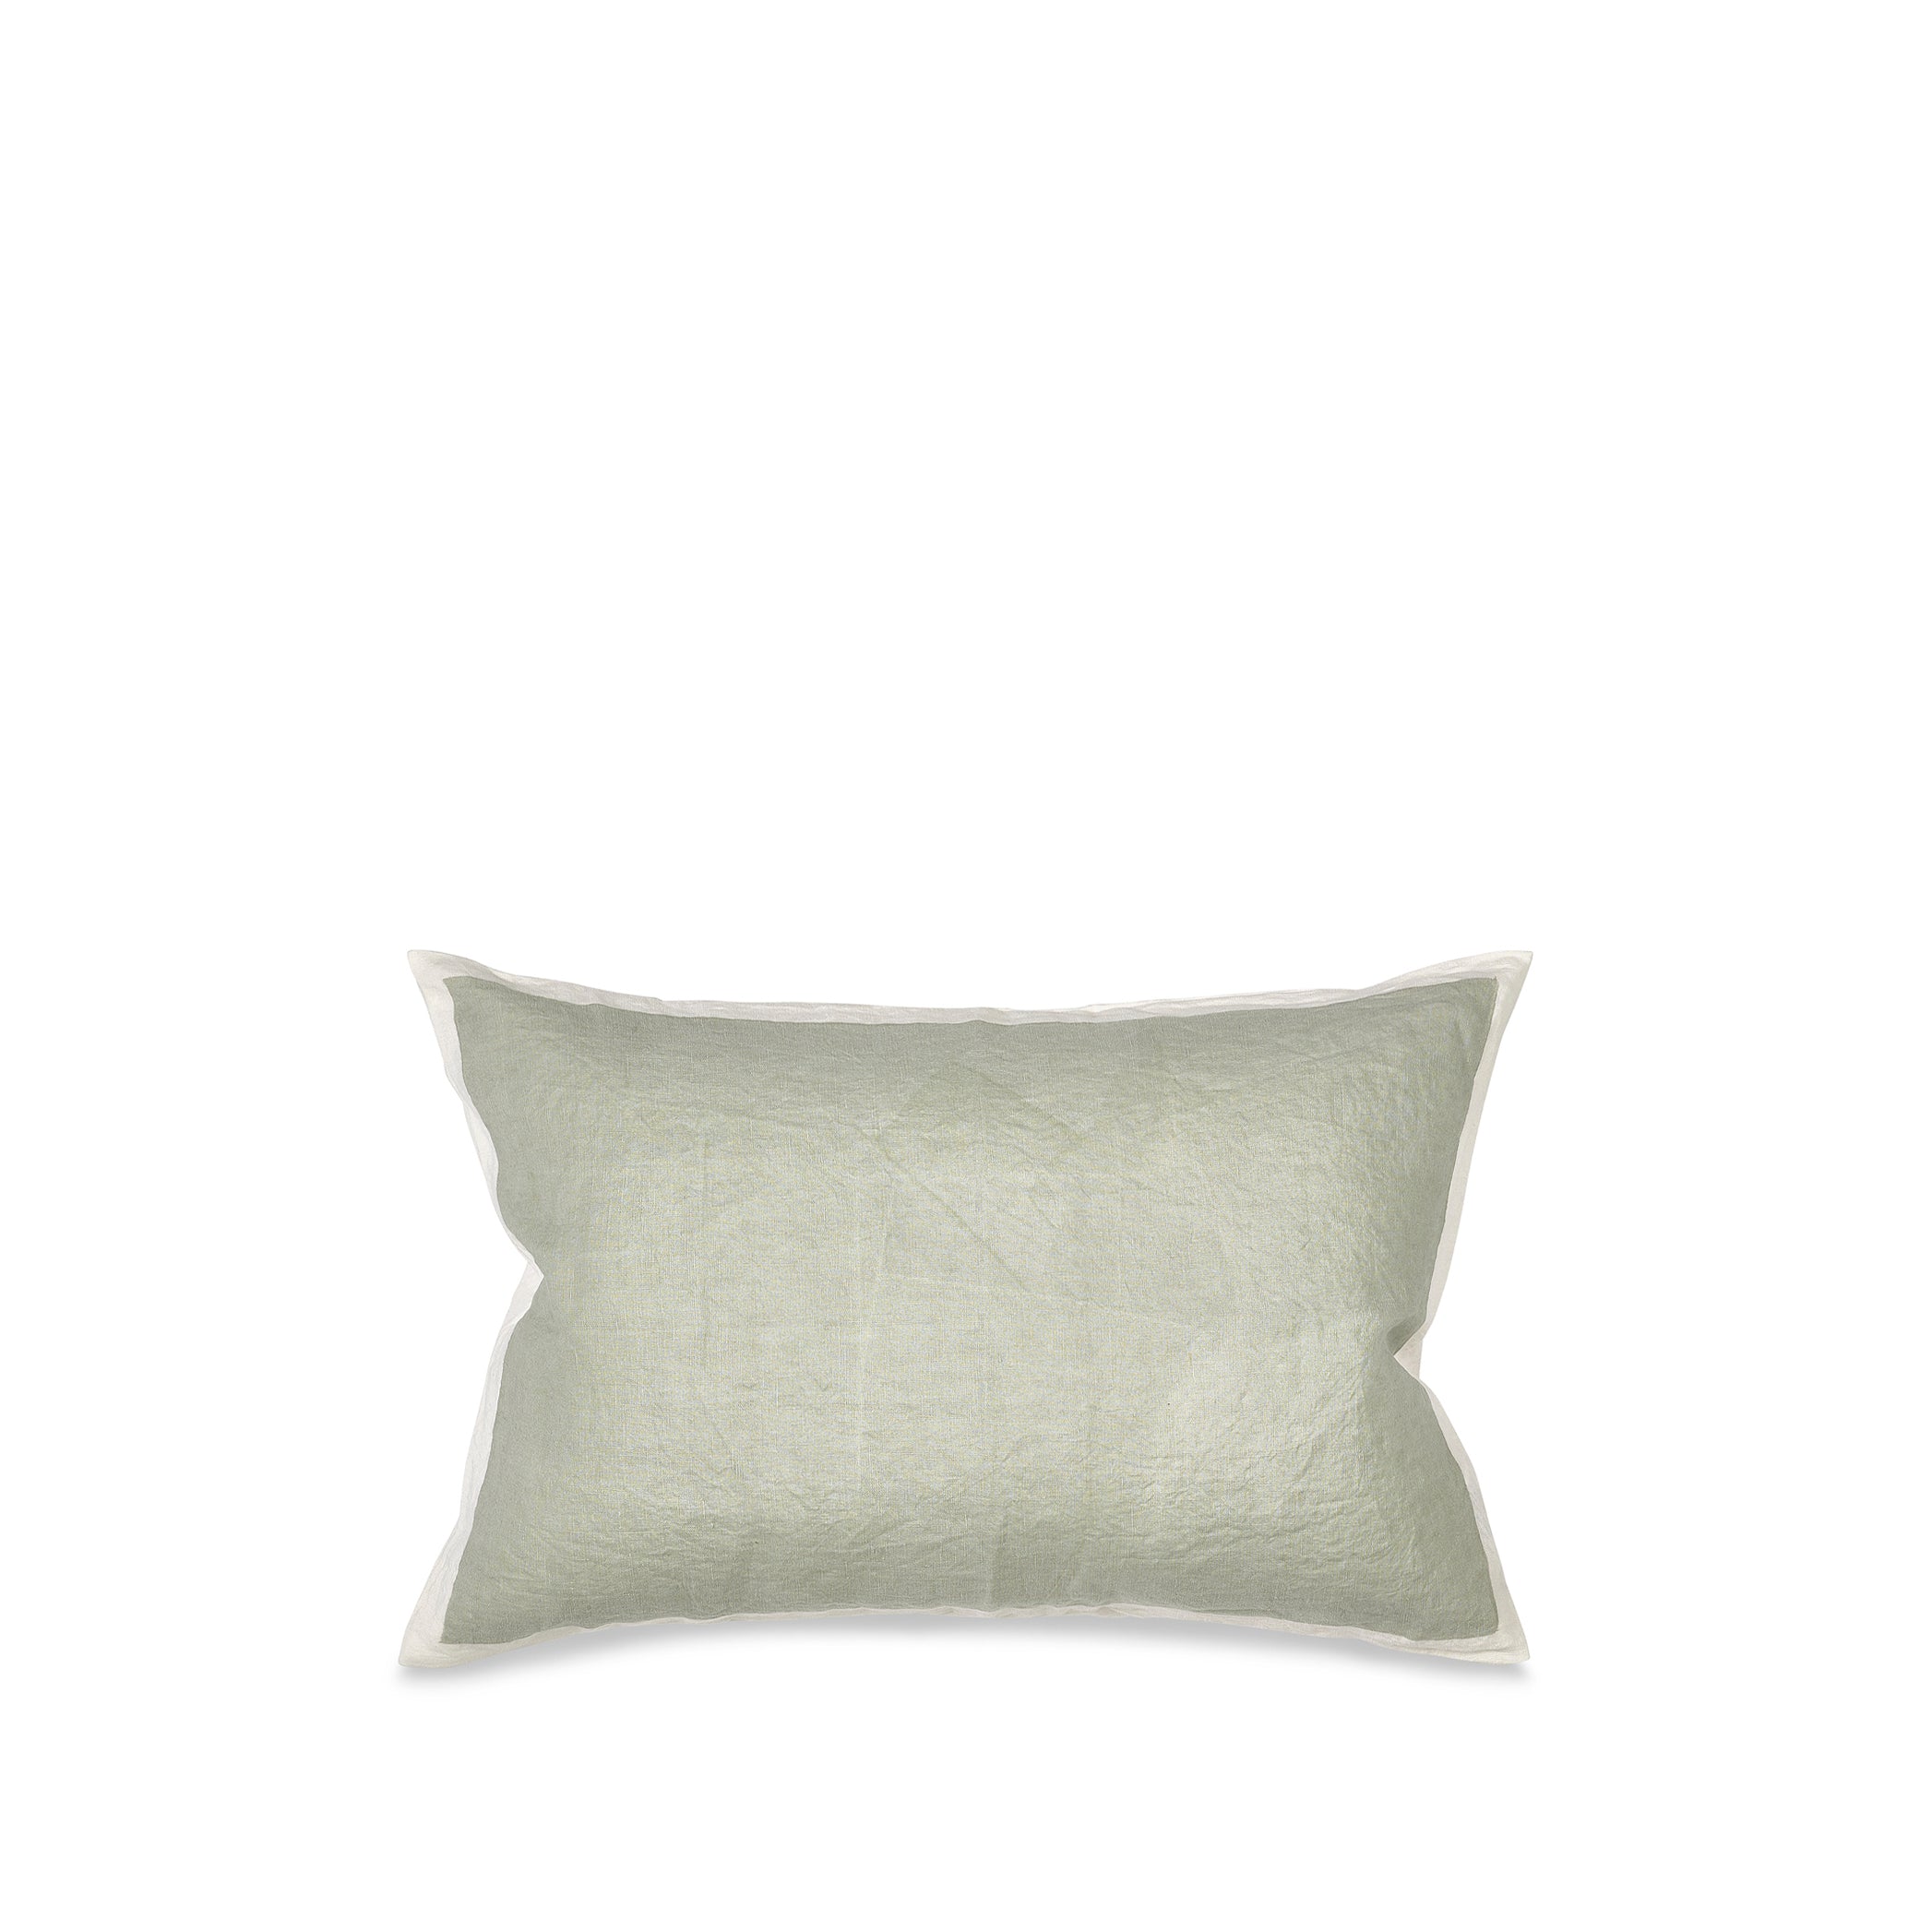 Hand Painted Linen Cushion in Pale Green, 60cm x 40cm